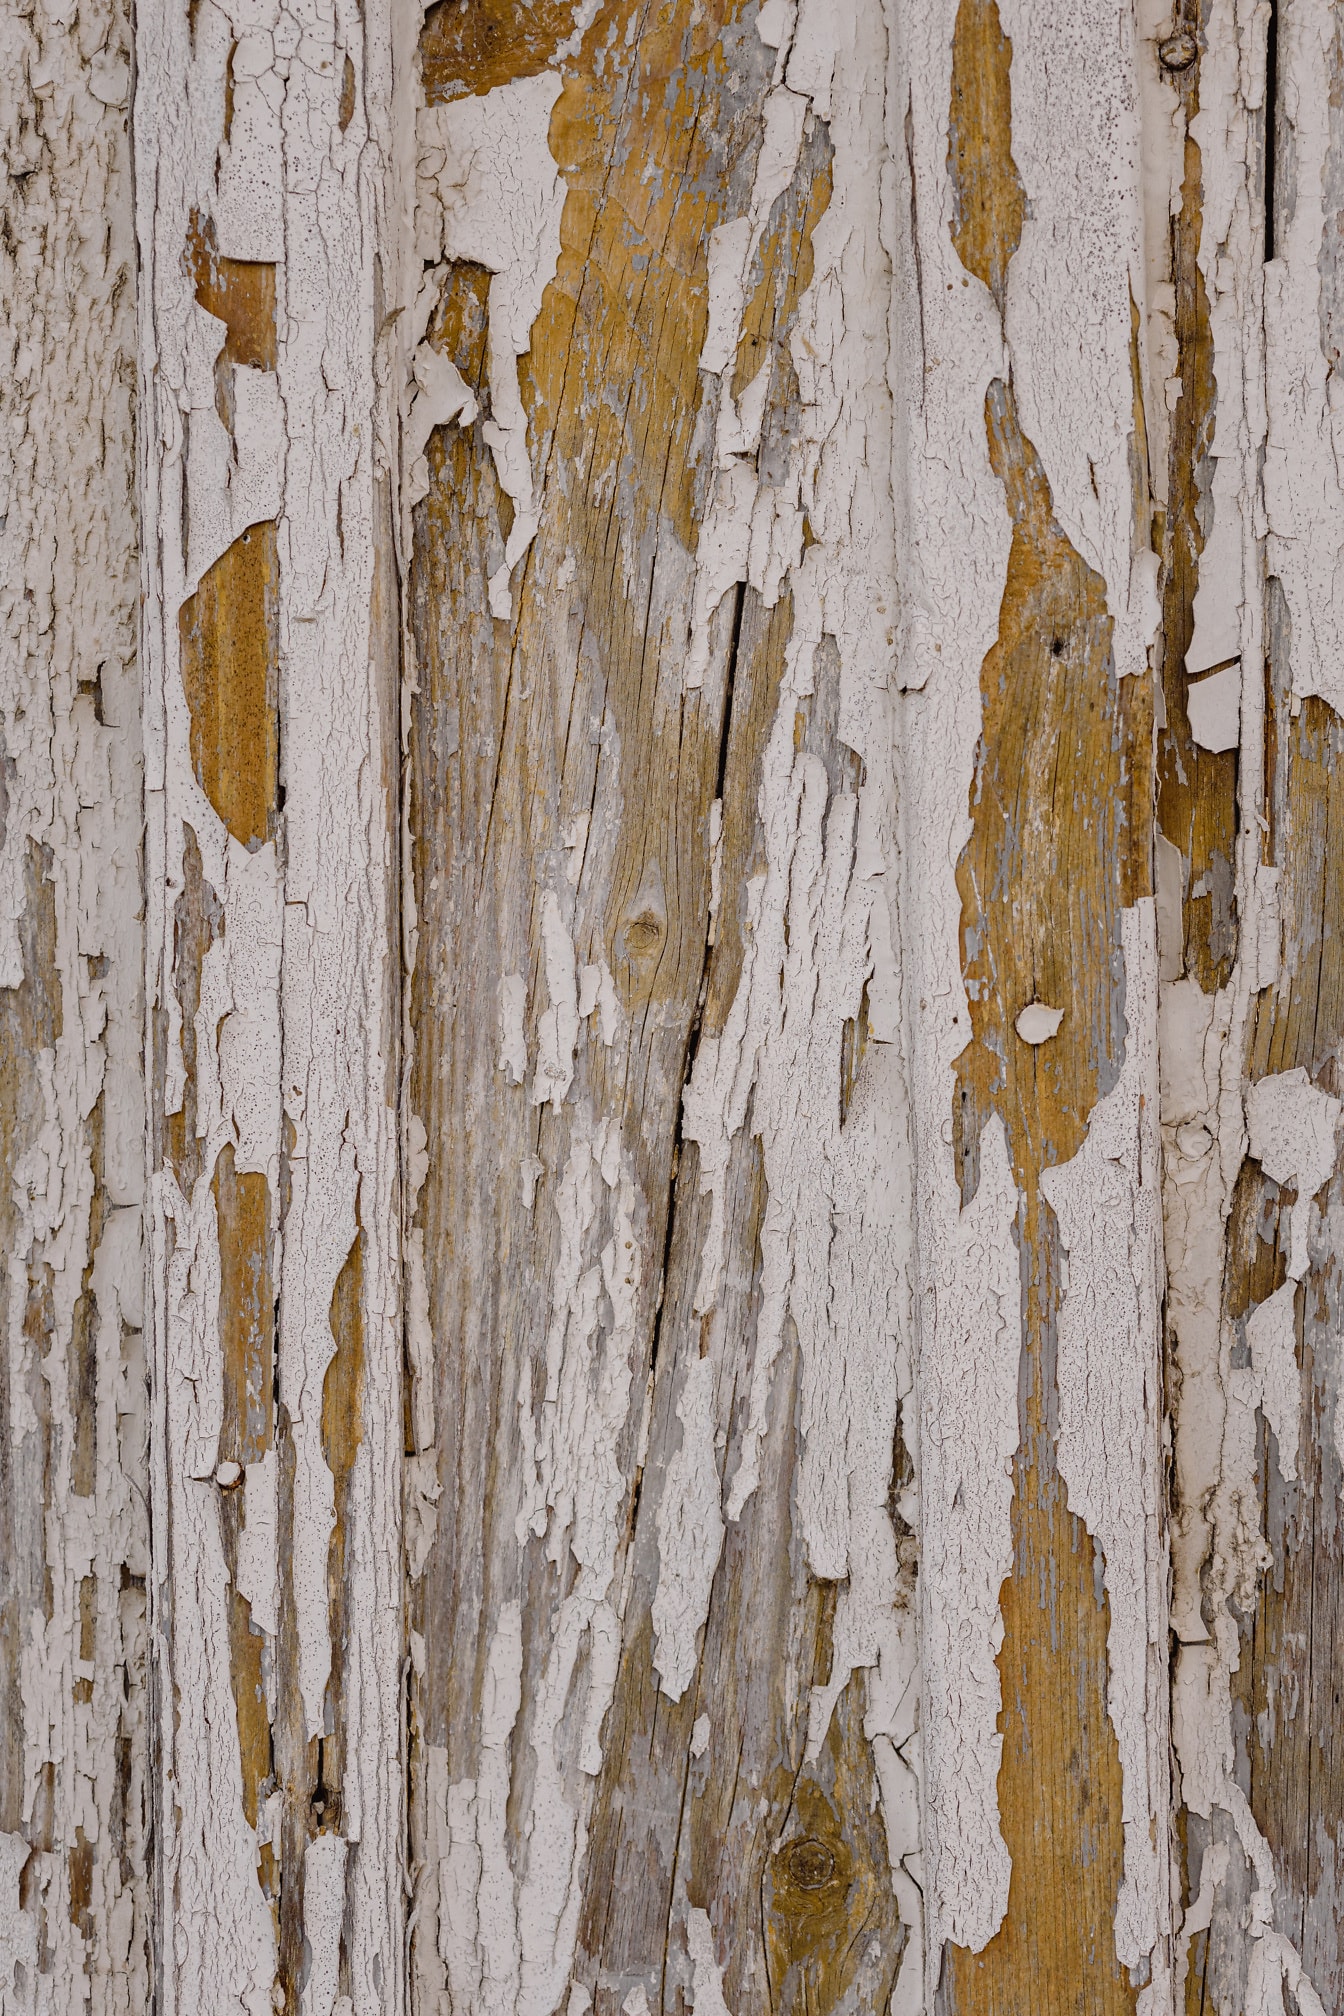 Old peeling white paint on wooden planks close-up pattern